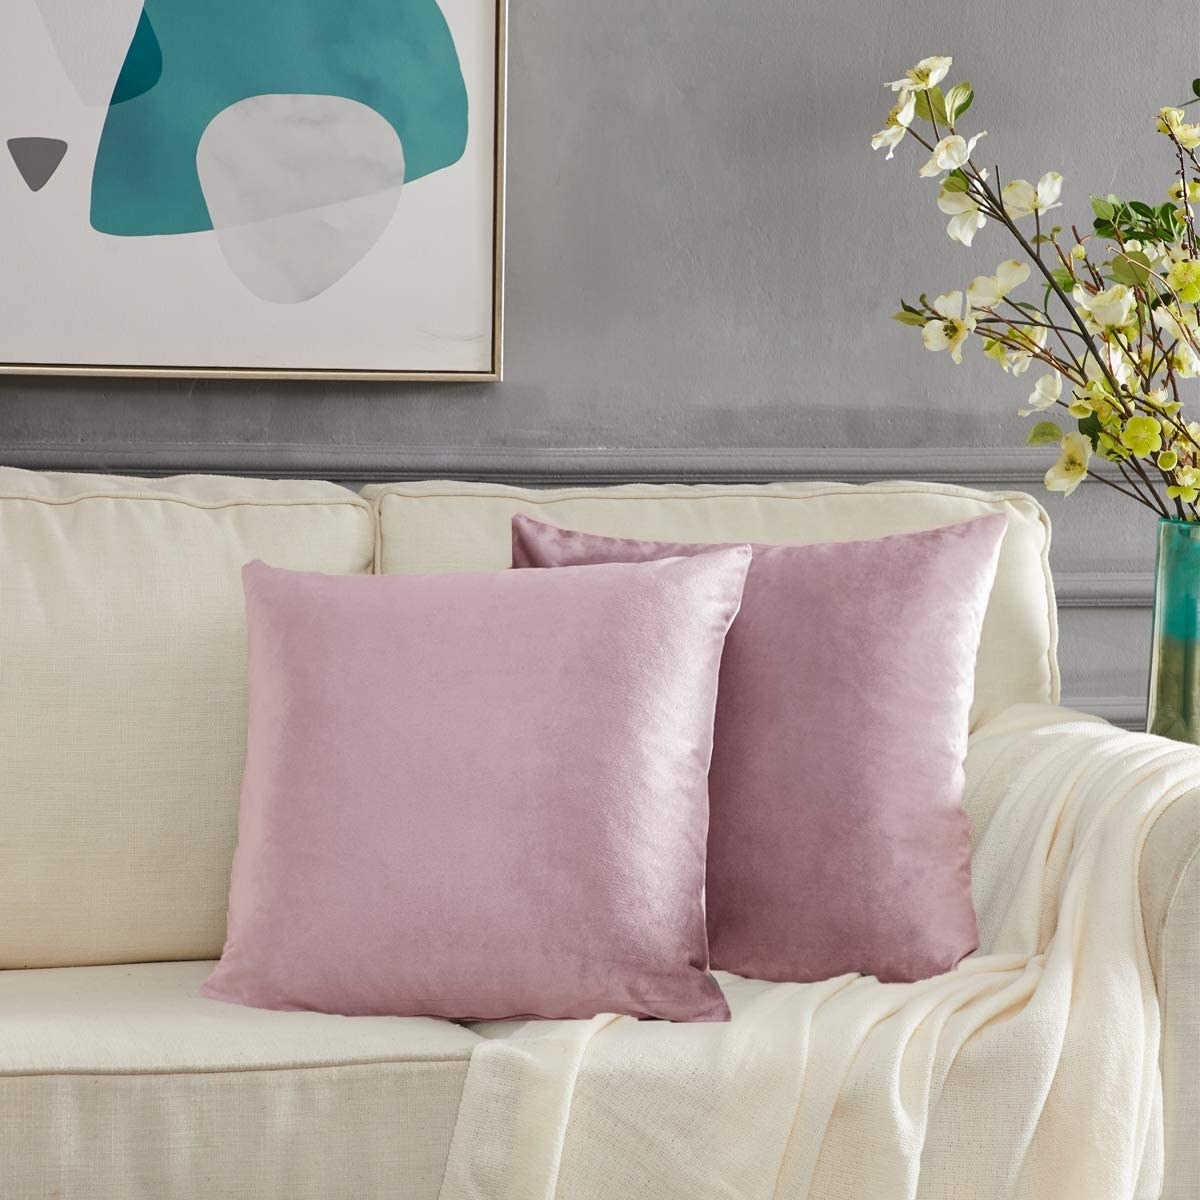 two throw pillows with satin covers on a couch